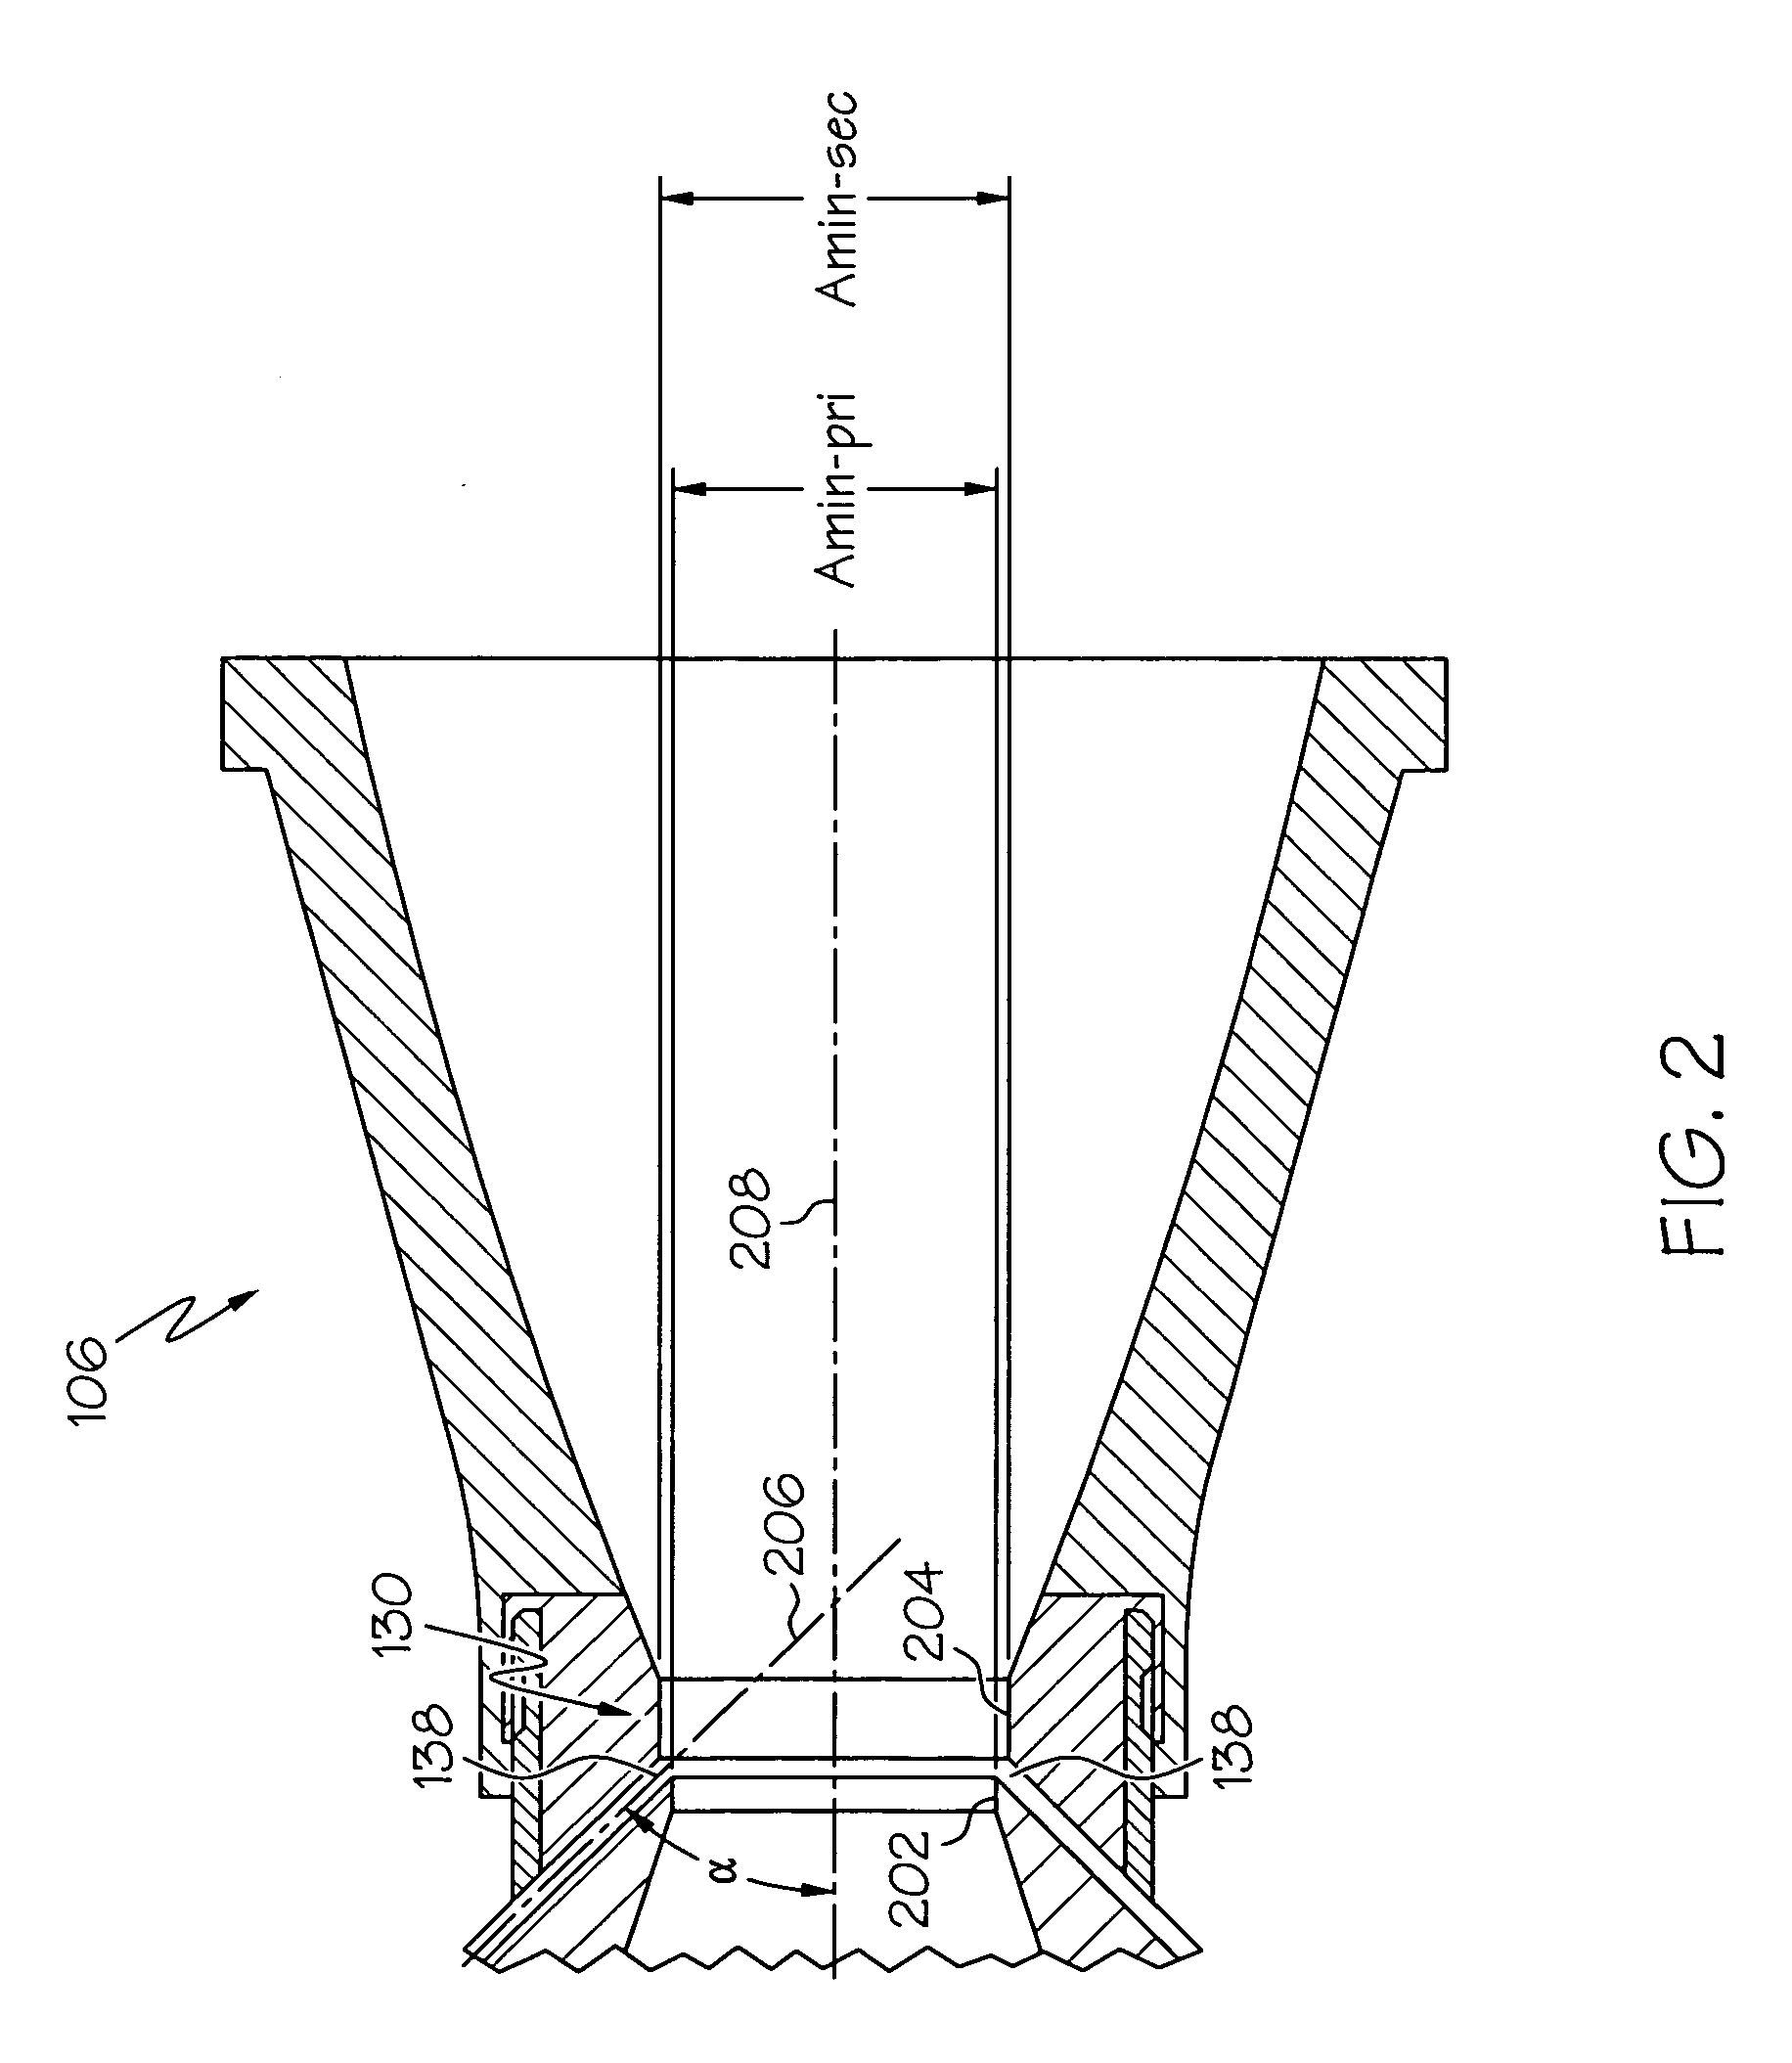 Rocket motor nozzle throat area control system and method